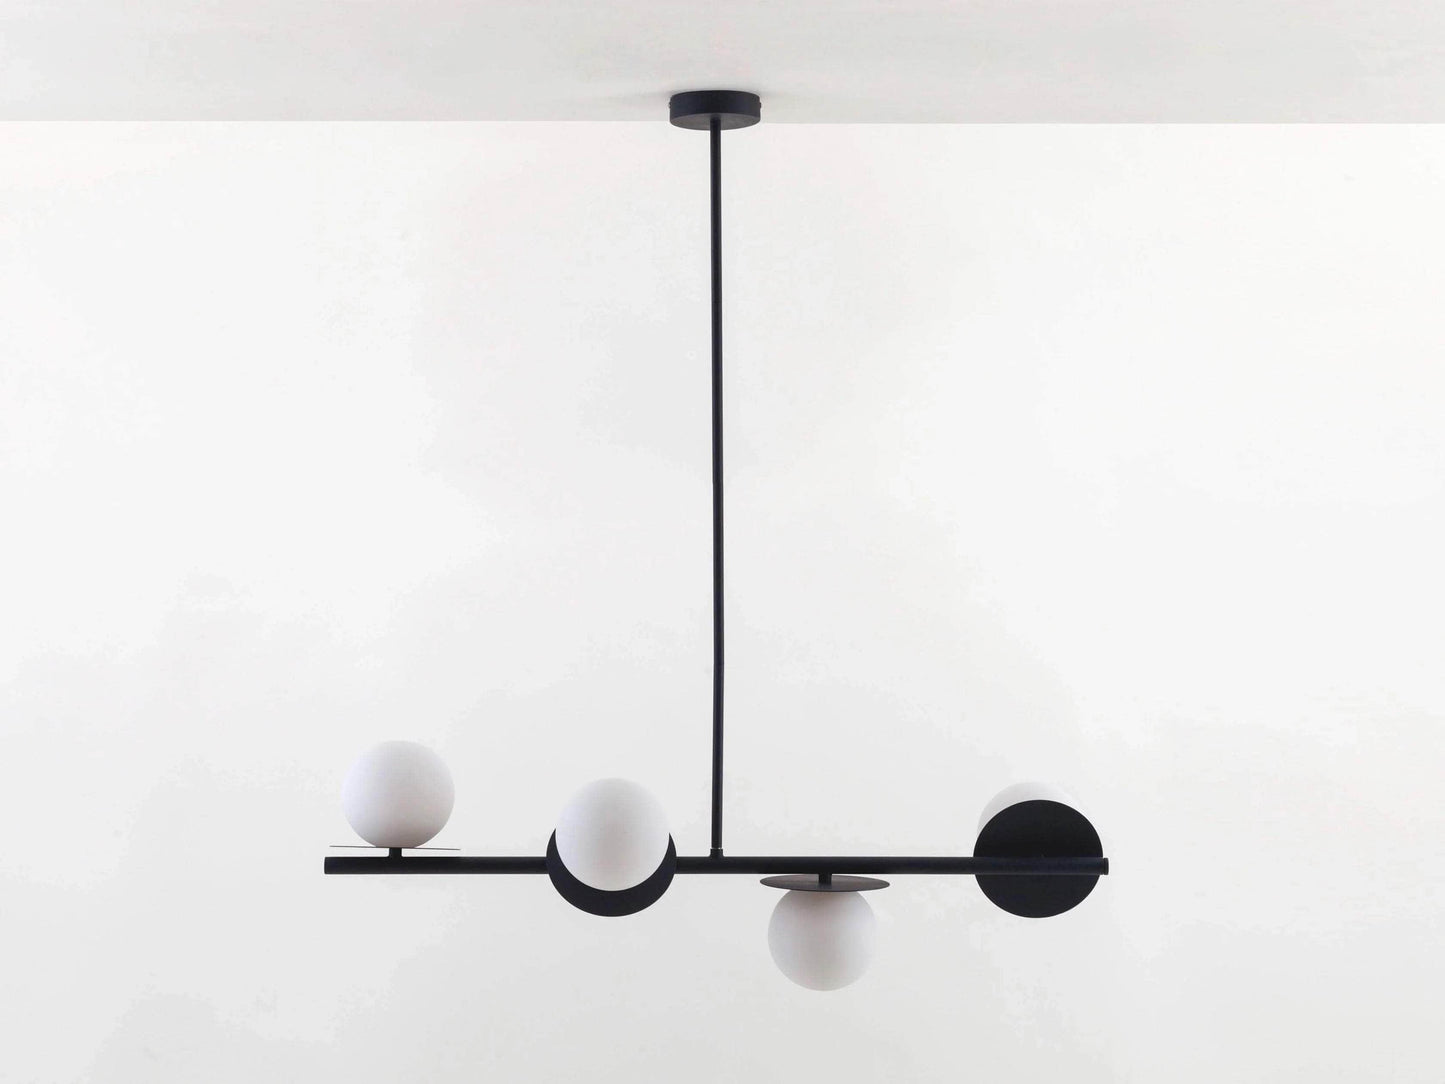 Charcoal grey opal disk ceiling light